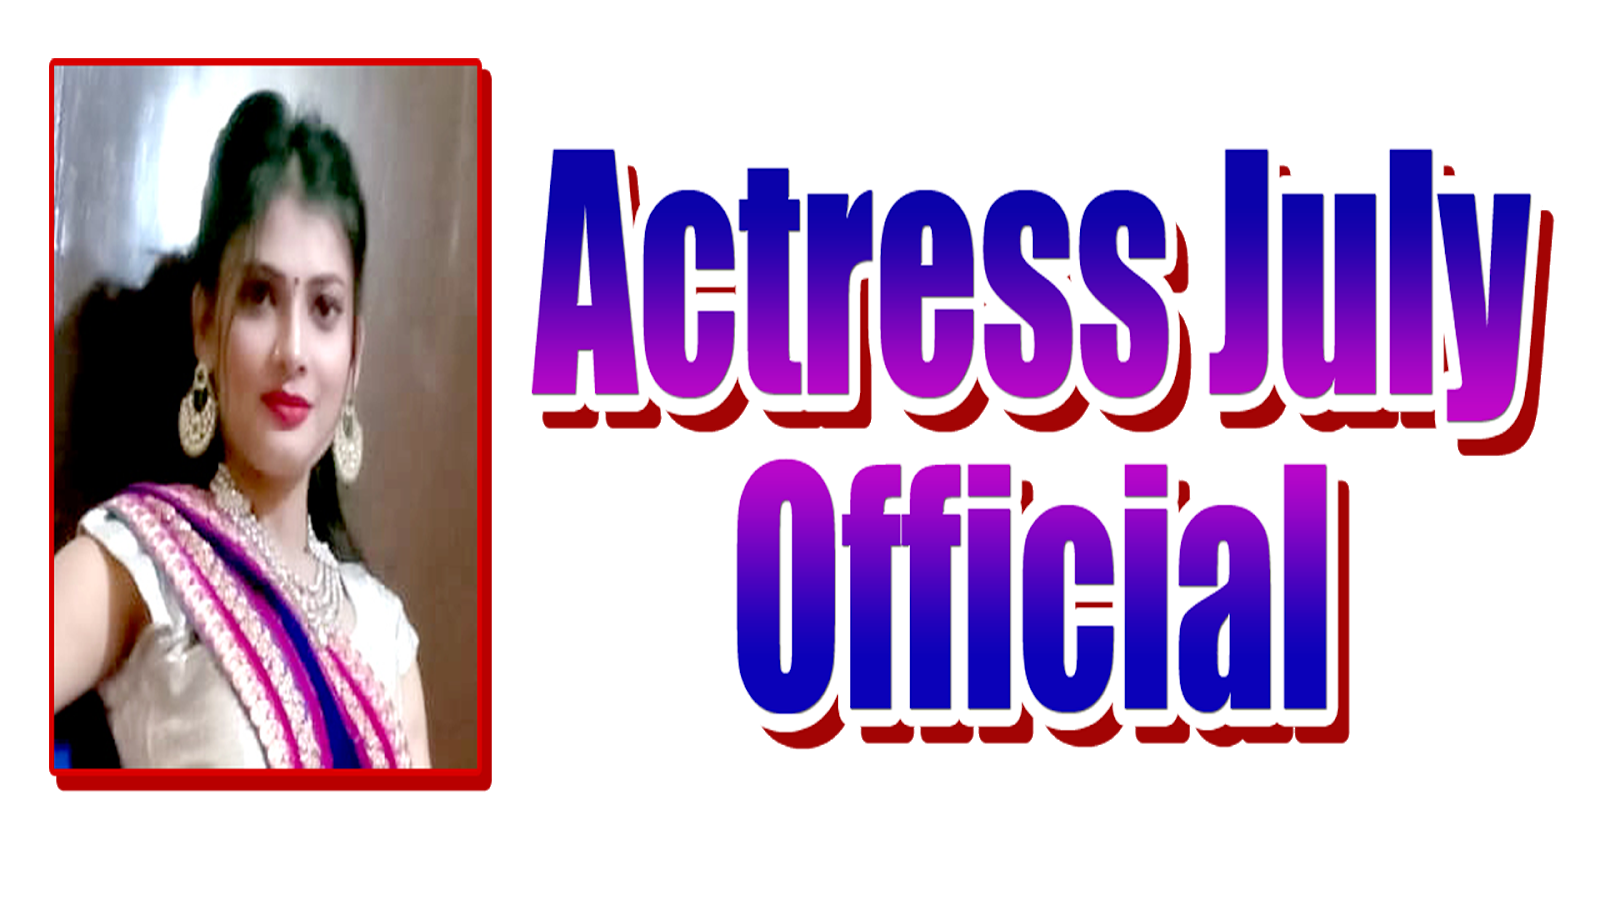 ACTRESS JULY OFFICIAL